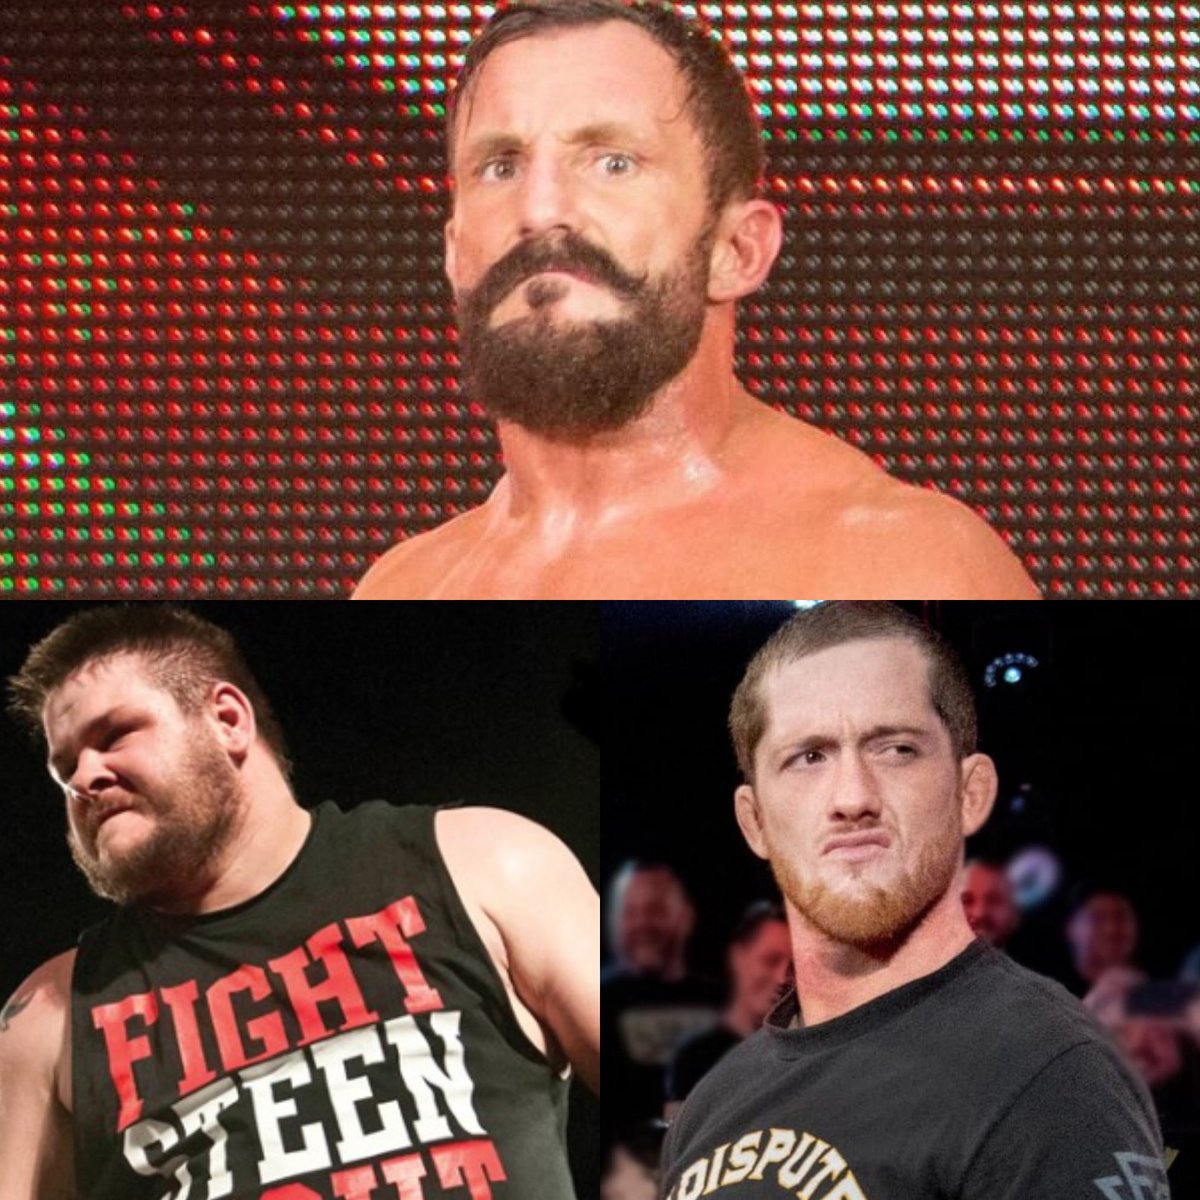 This would be a great faction. #BobbyFish #KevinSteen #KyleOReilly #wrestlingcommunity